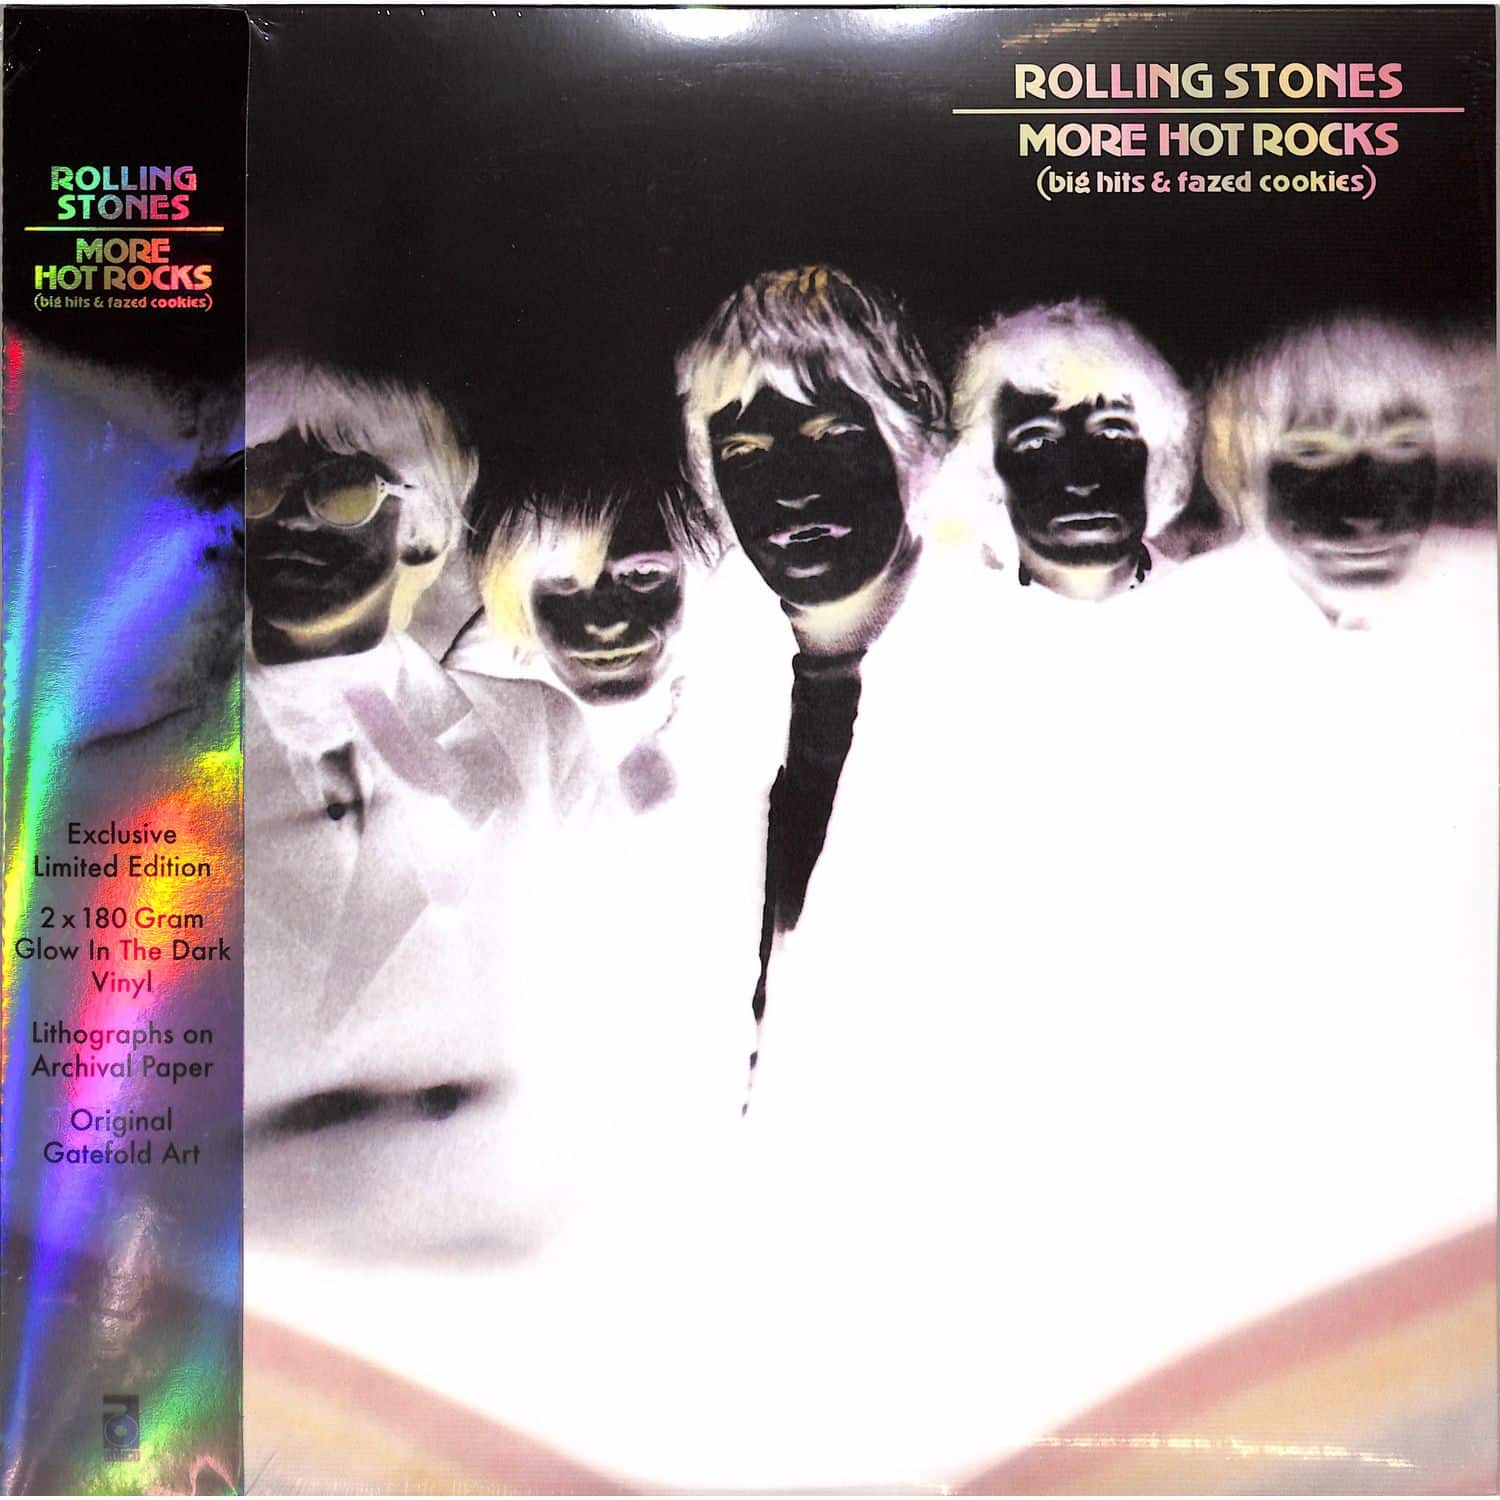 The Rolling Stones - MORE HOT ROCKS 